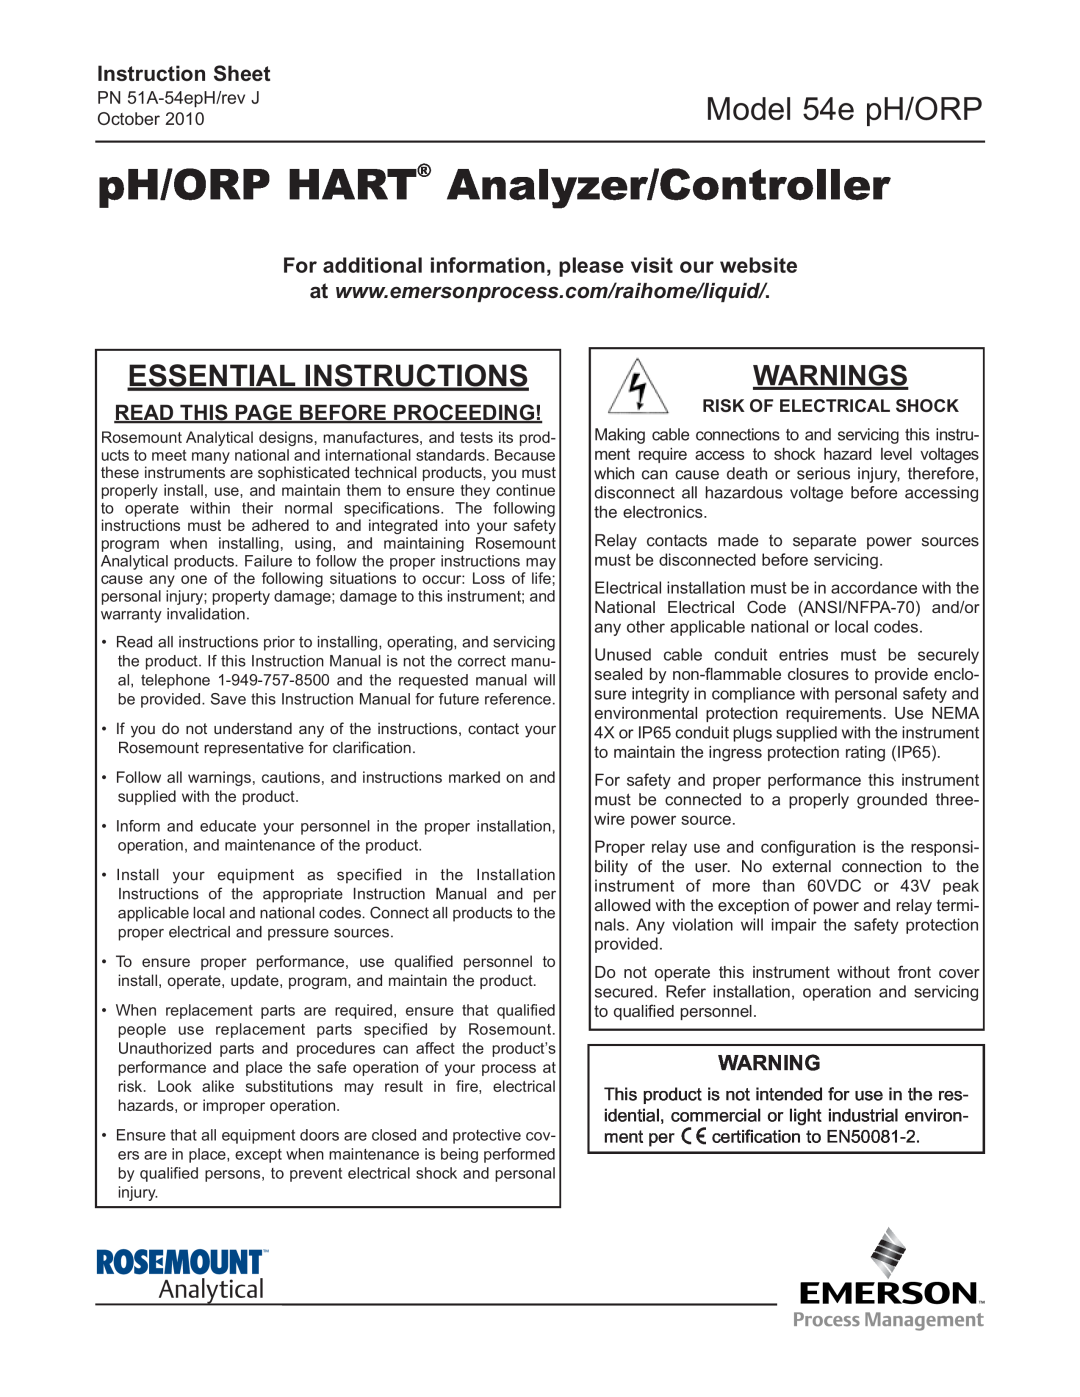 Emerson instruction sheet Instruction Sheet, For additional information, please visit our website, Model 54e pH/ORP 